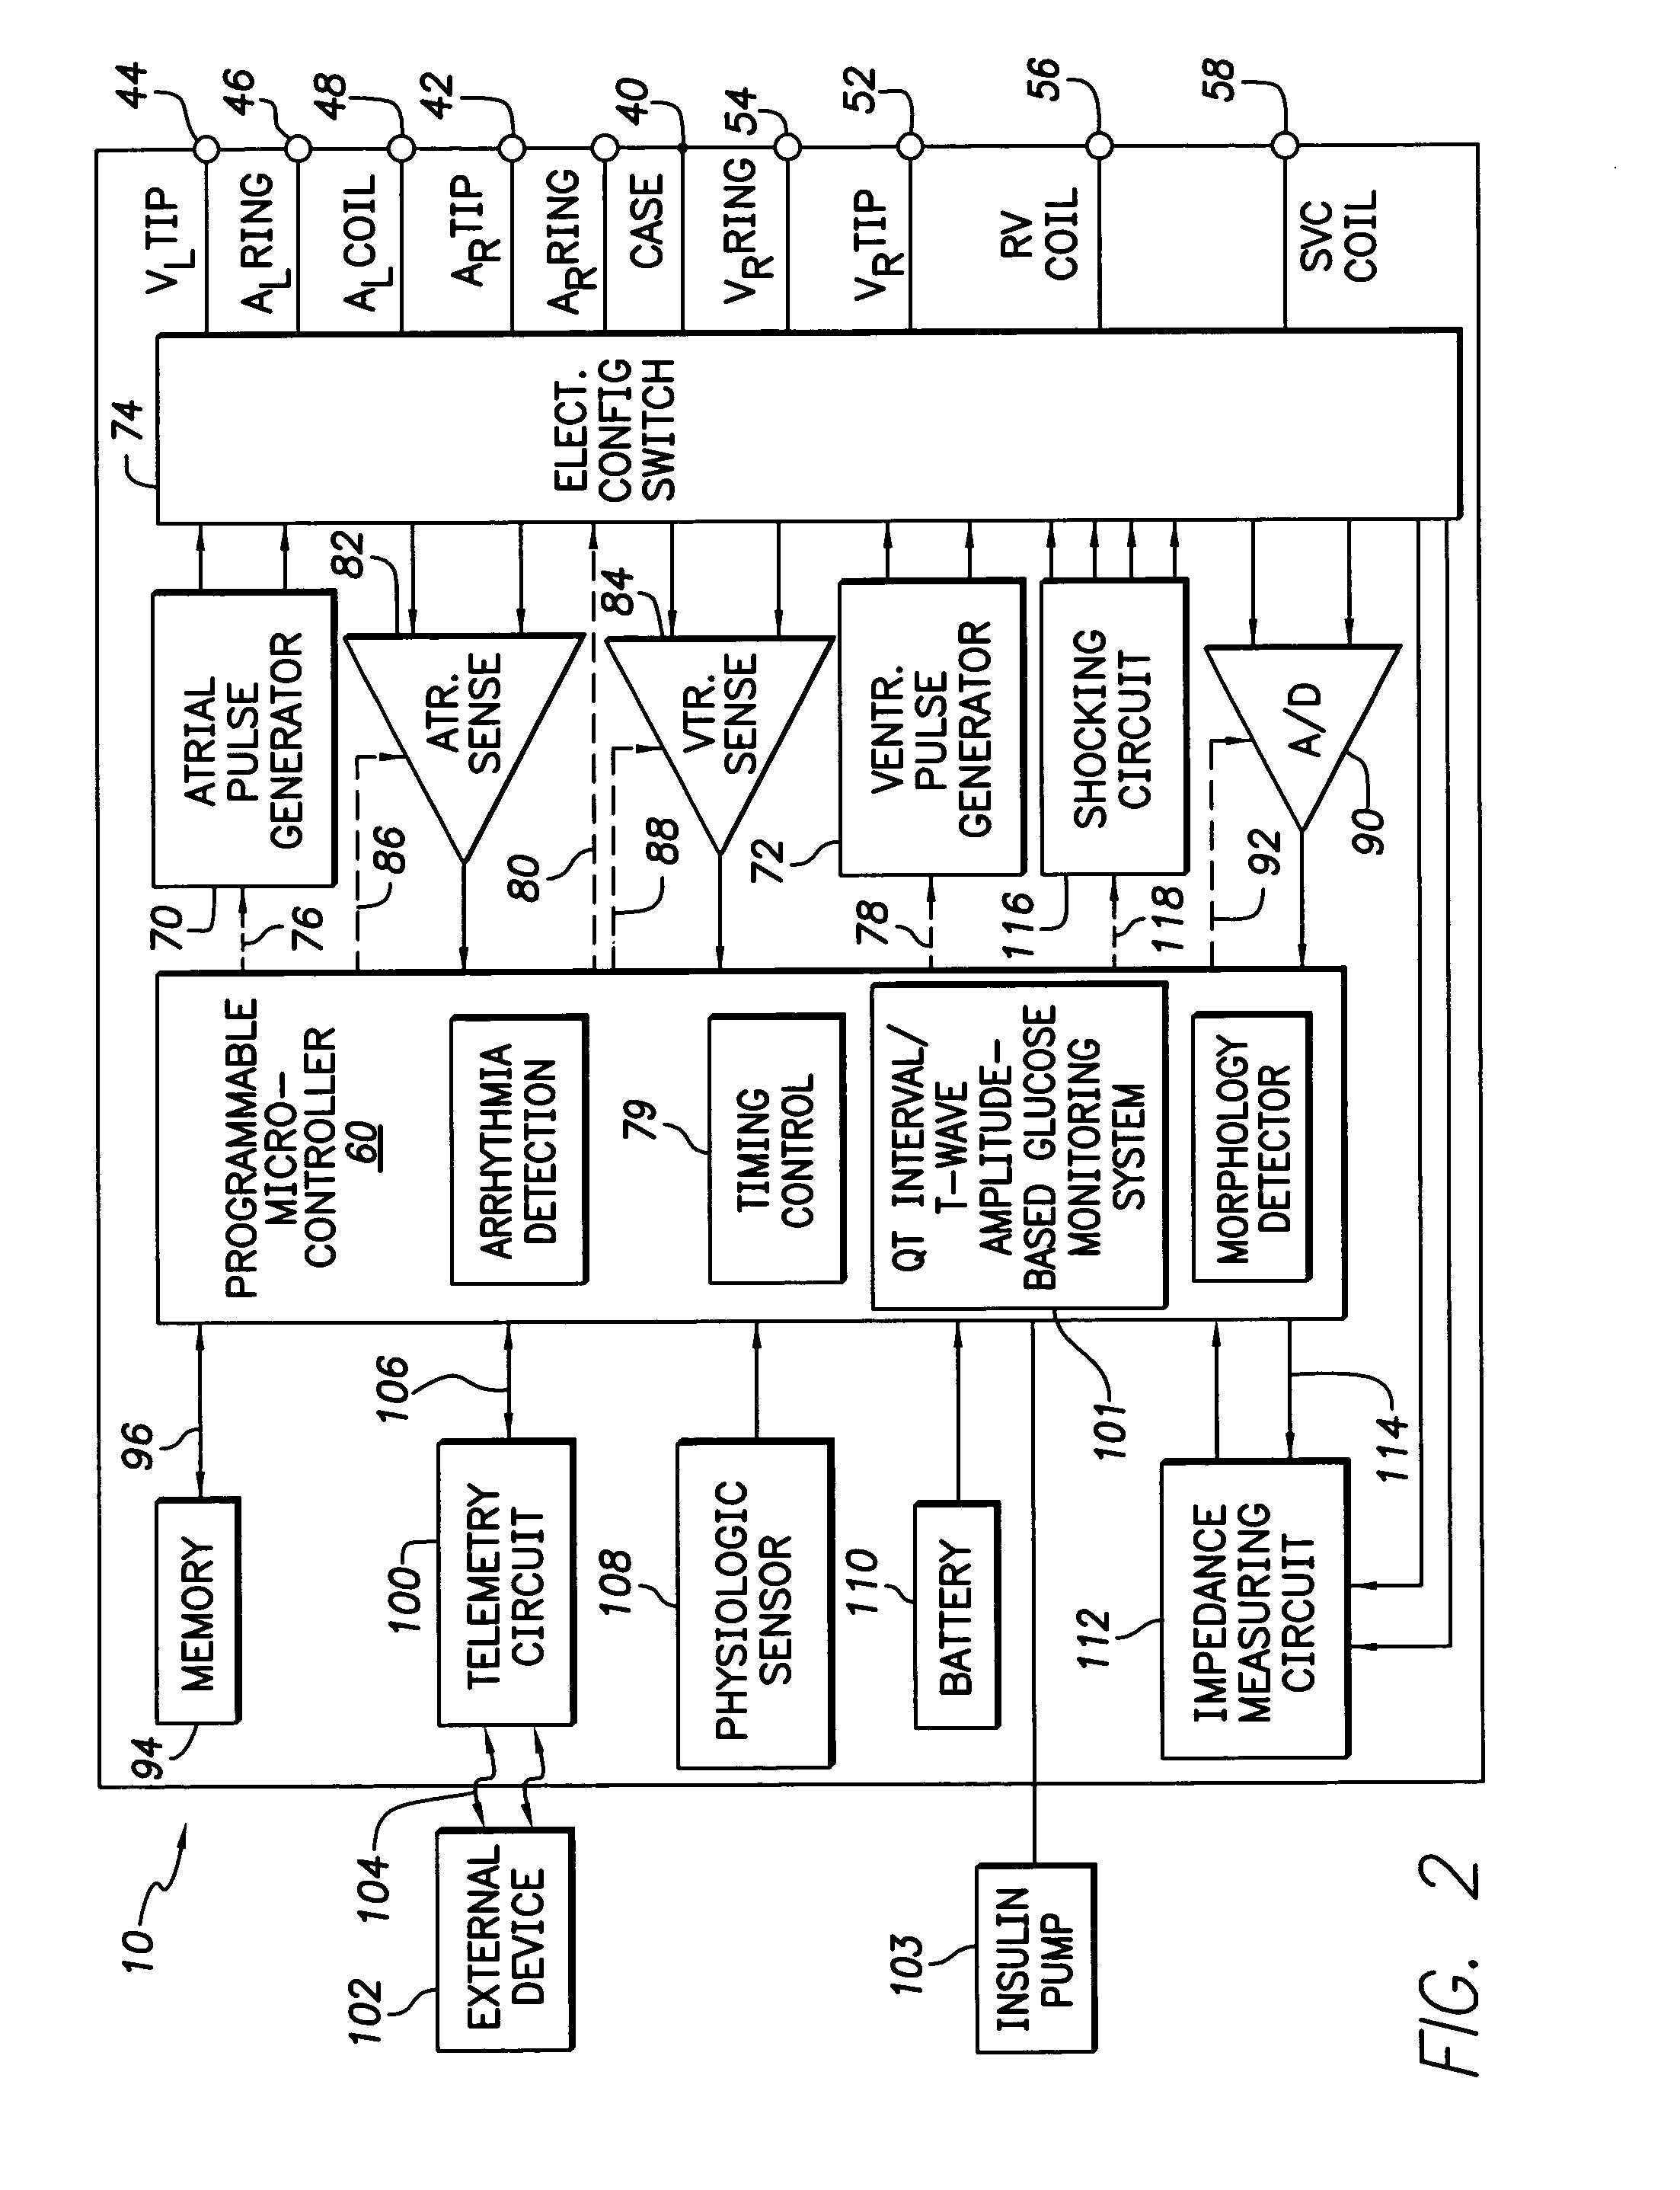 System and method for monitoring blood glucose levels using an implantable medical device